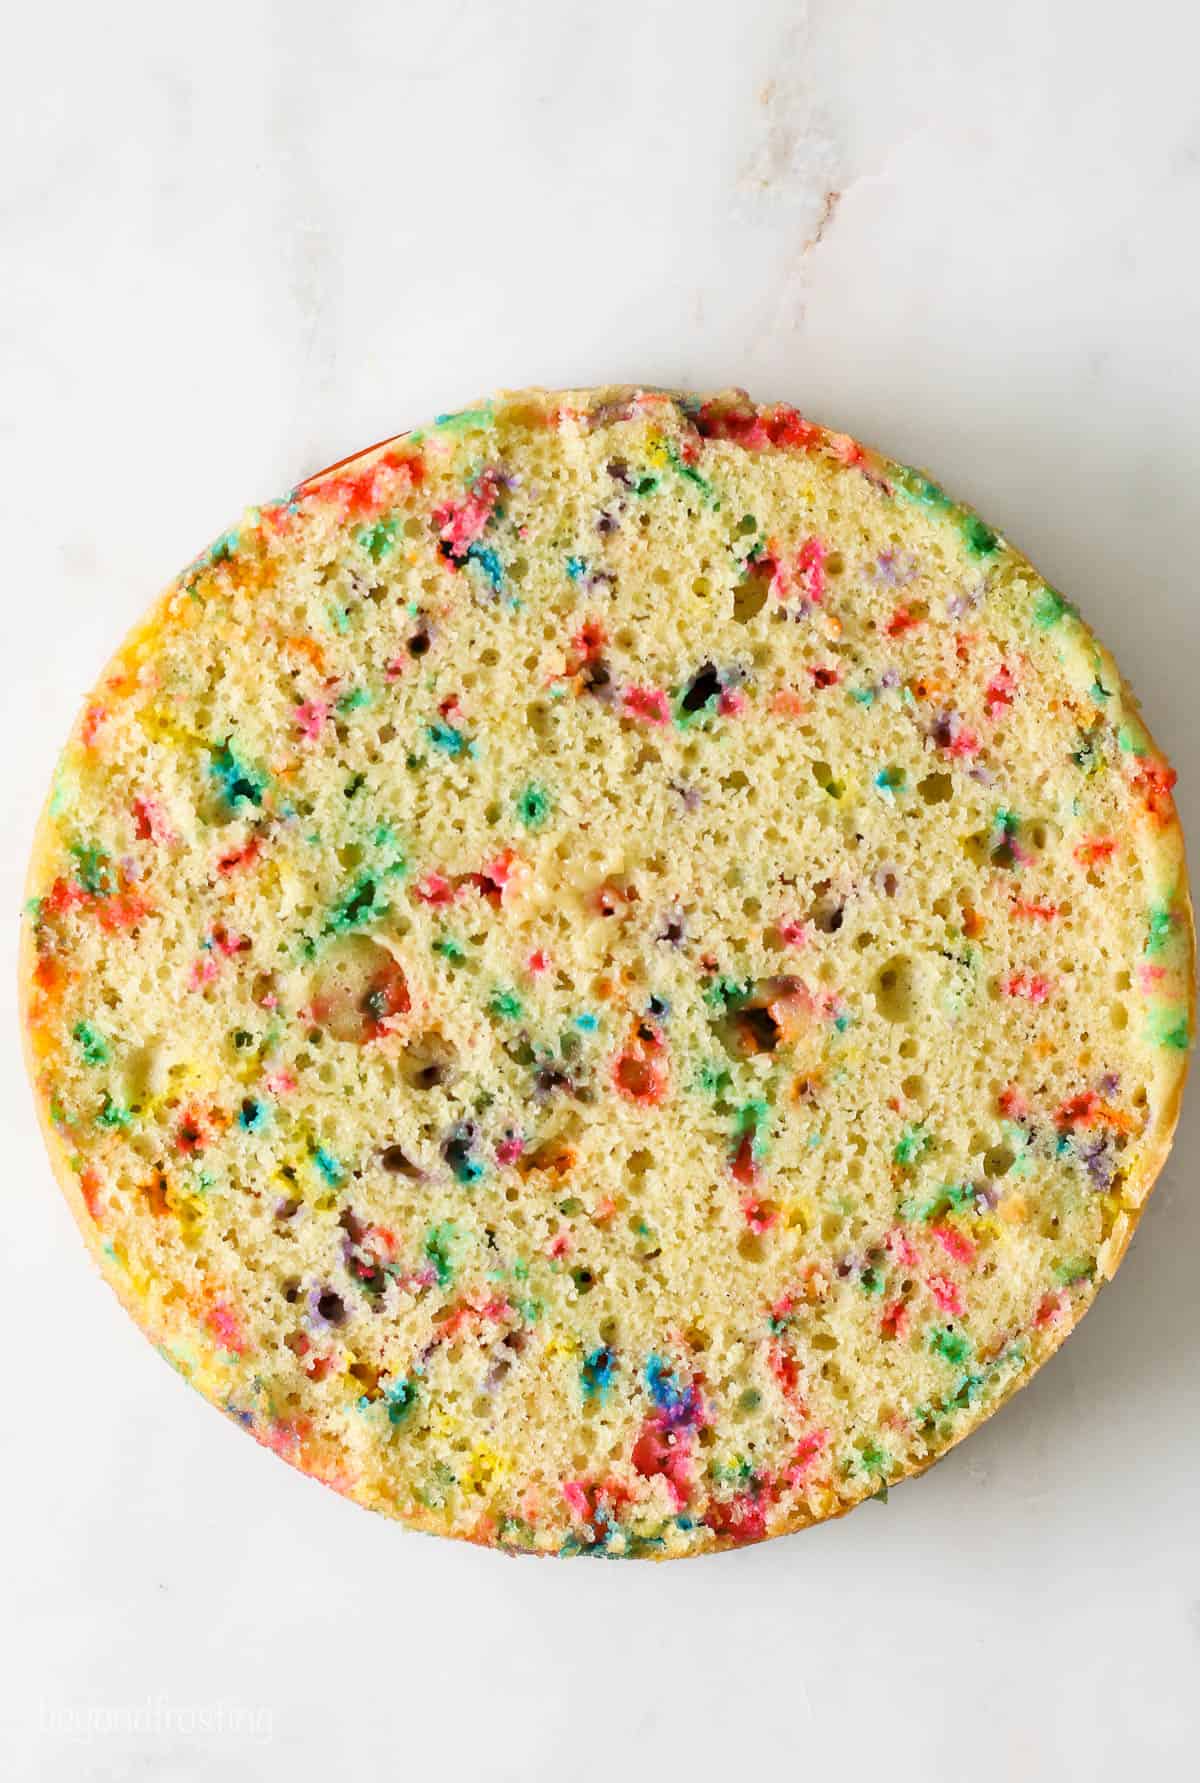 a leveled layer of funfetti cake showing the inside of the cake